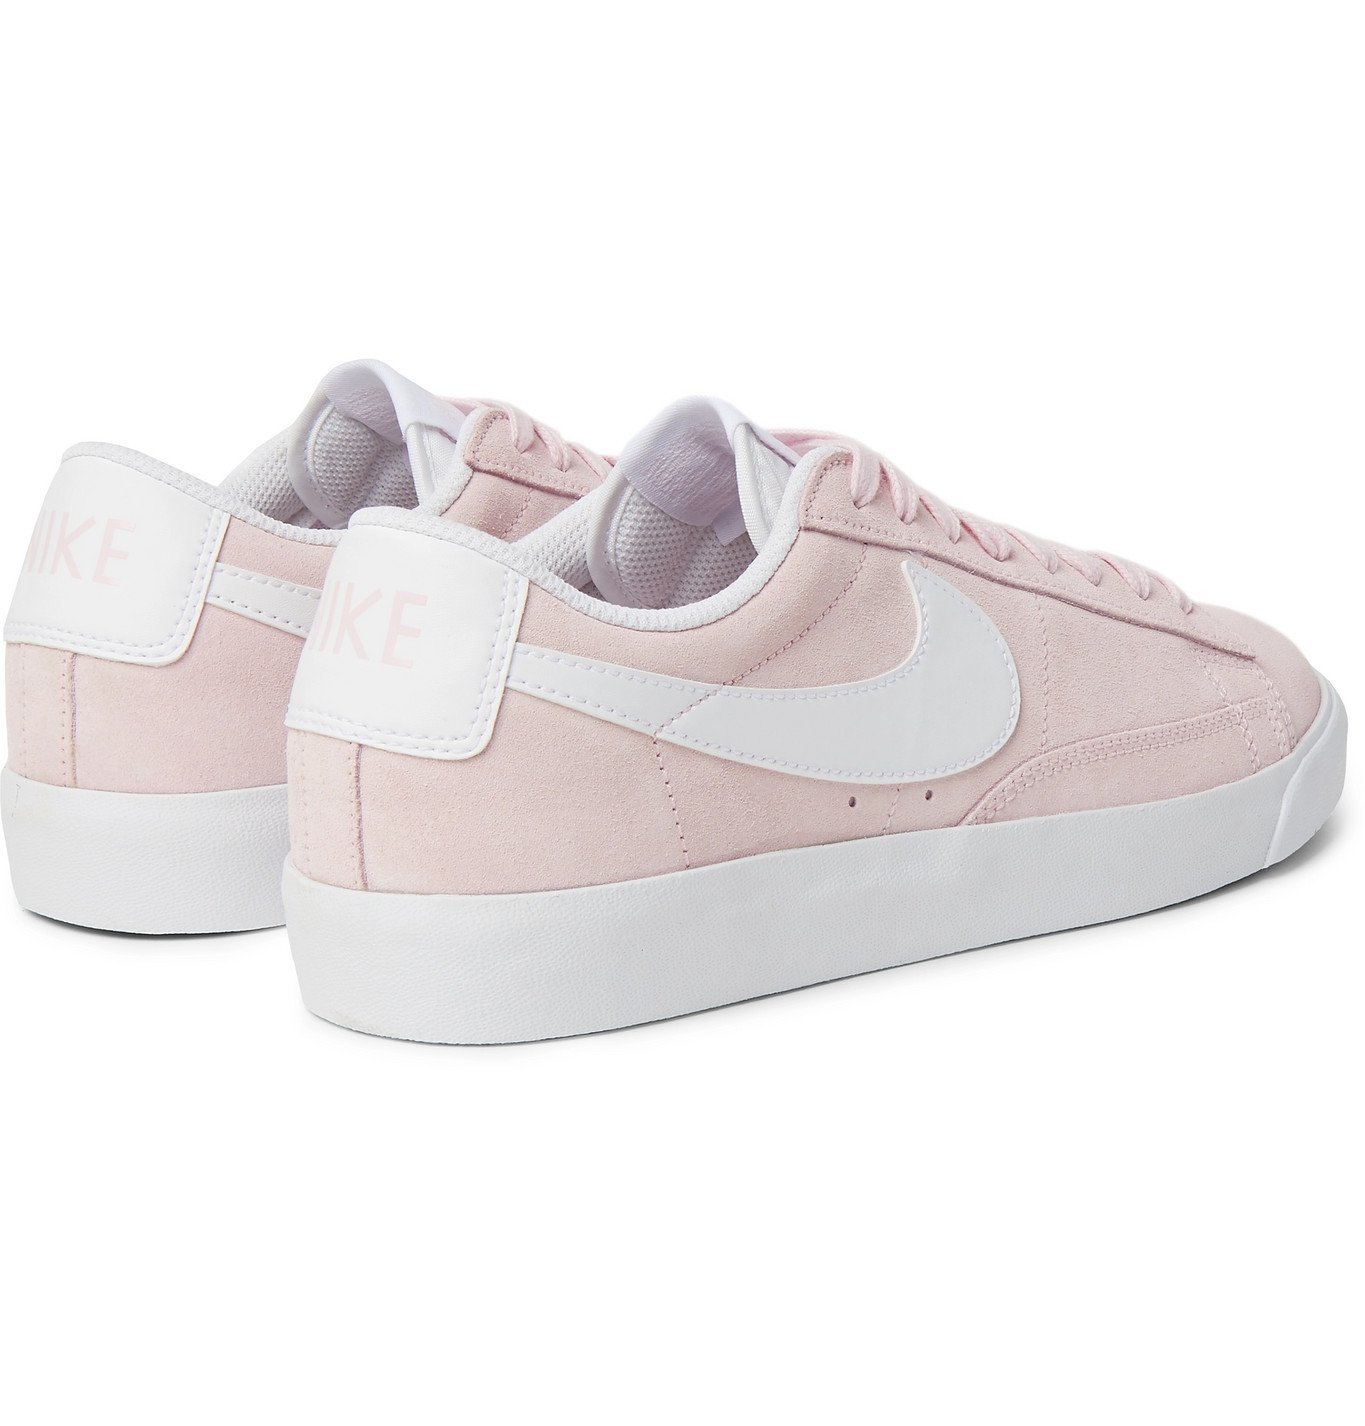 NIKE - Blazer Low Leather-Trimmed Suede Sneakers - Pink Nike